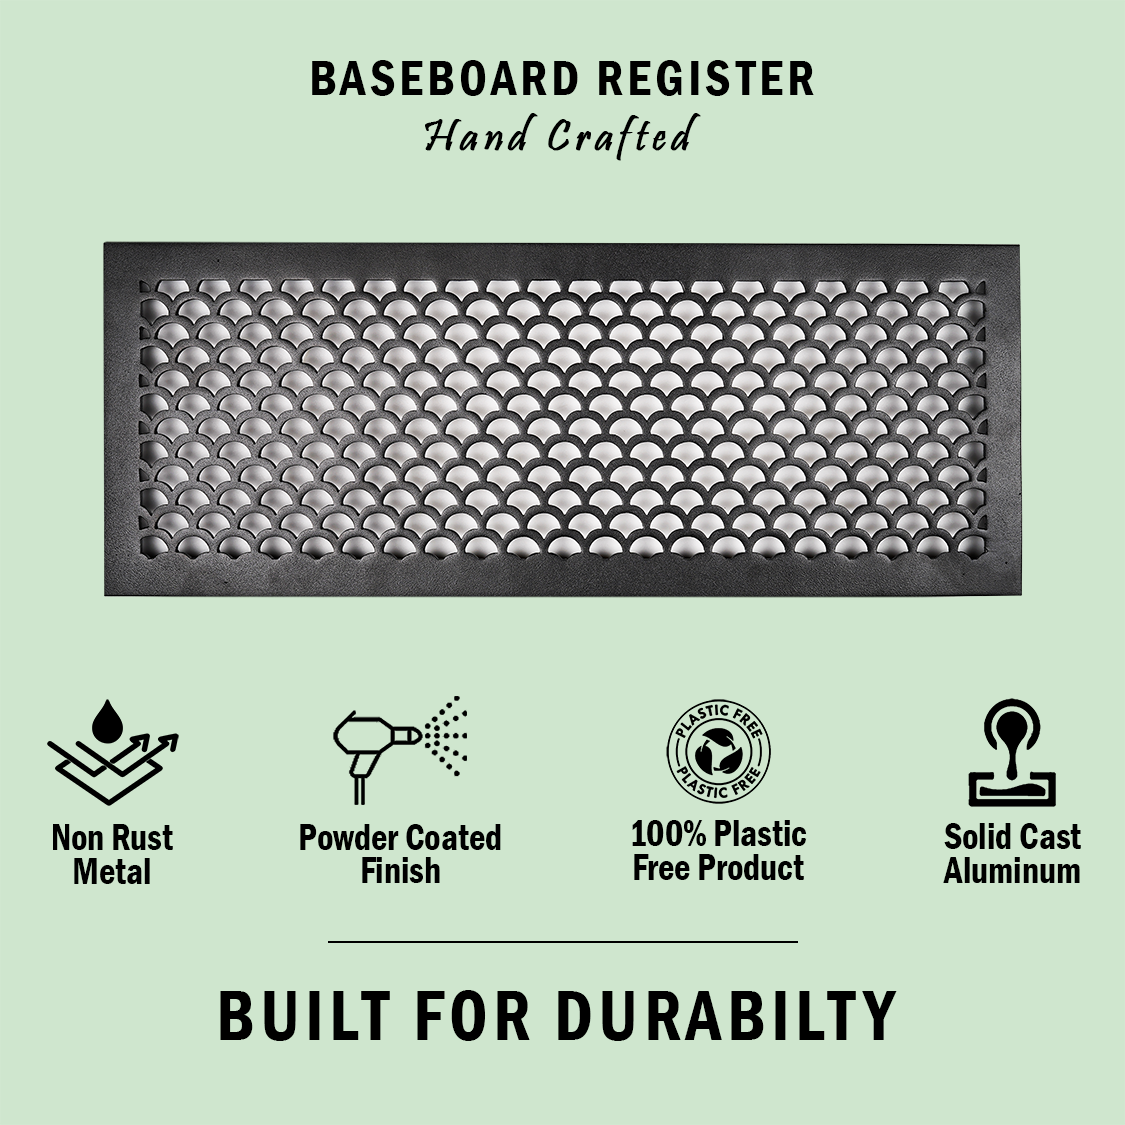 Scallop BASEBOARD 6"x28" Duct opening Solid Cast Aluminum Grill Vent Cover | Powder Coated